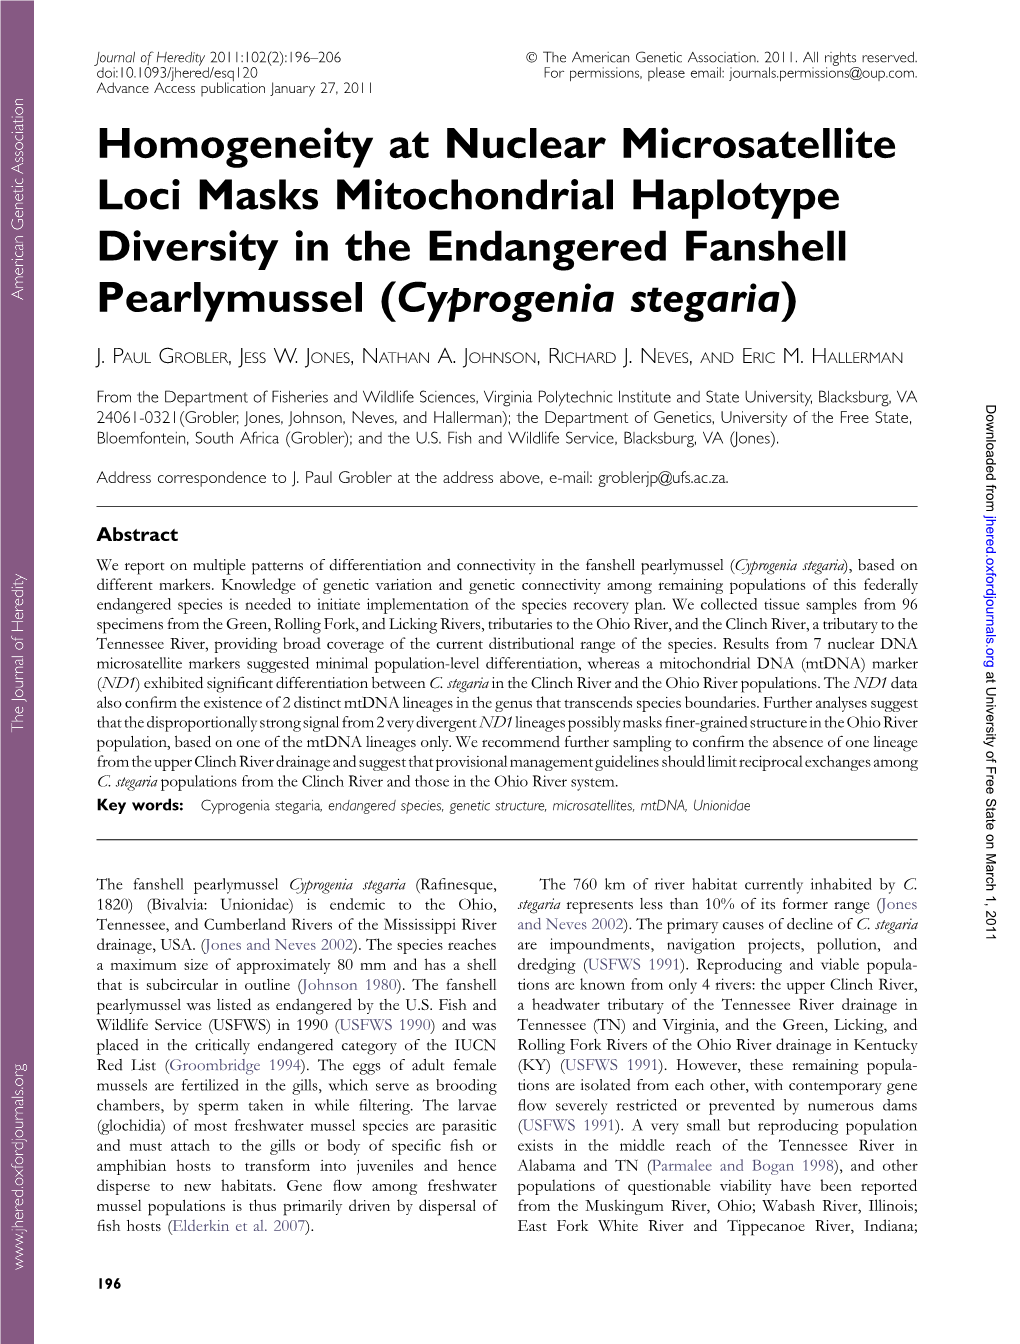 Homogeneity at Nuclear Microsatellite Loci Masks Mitochondrial Haplotype Diversity in the Endangered Fanshell Pearlymussel (Cyprogenia Stegaria)